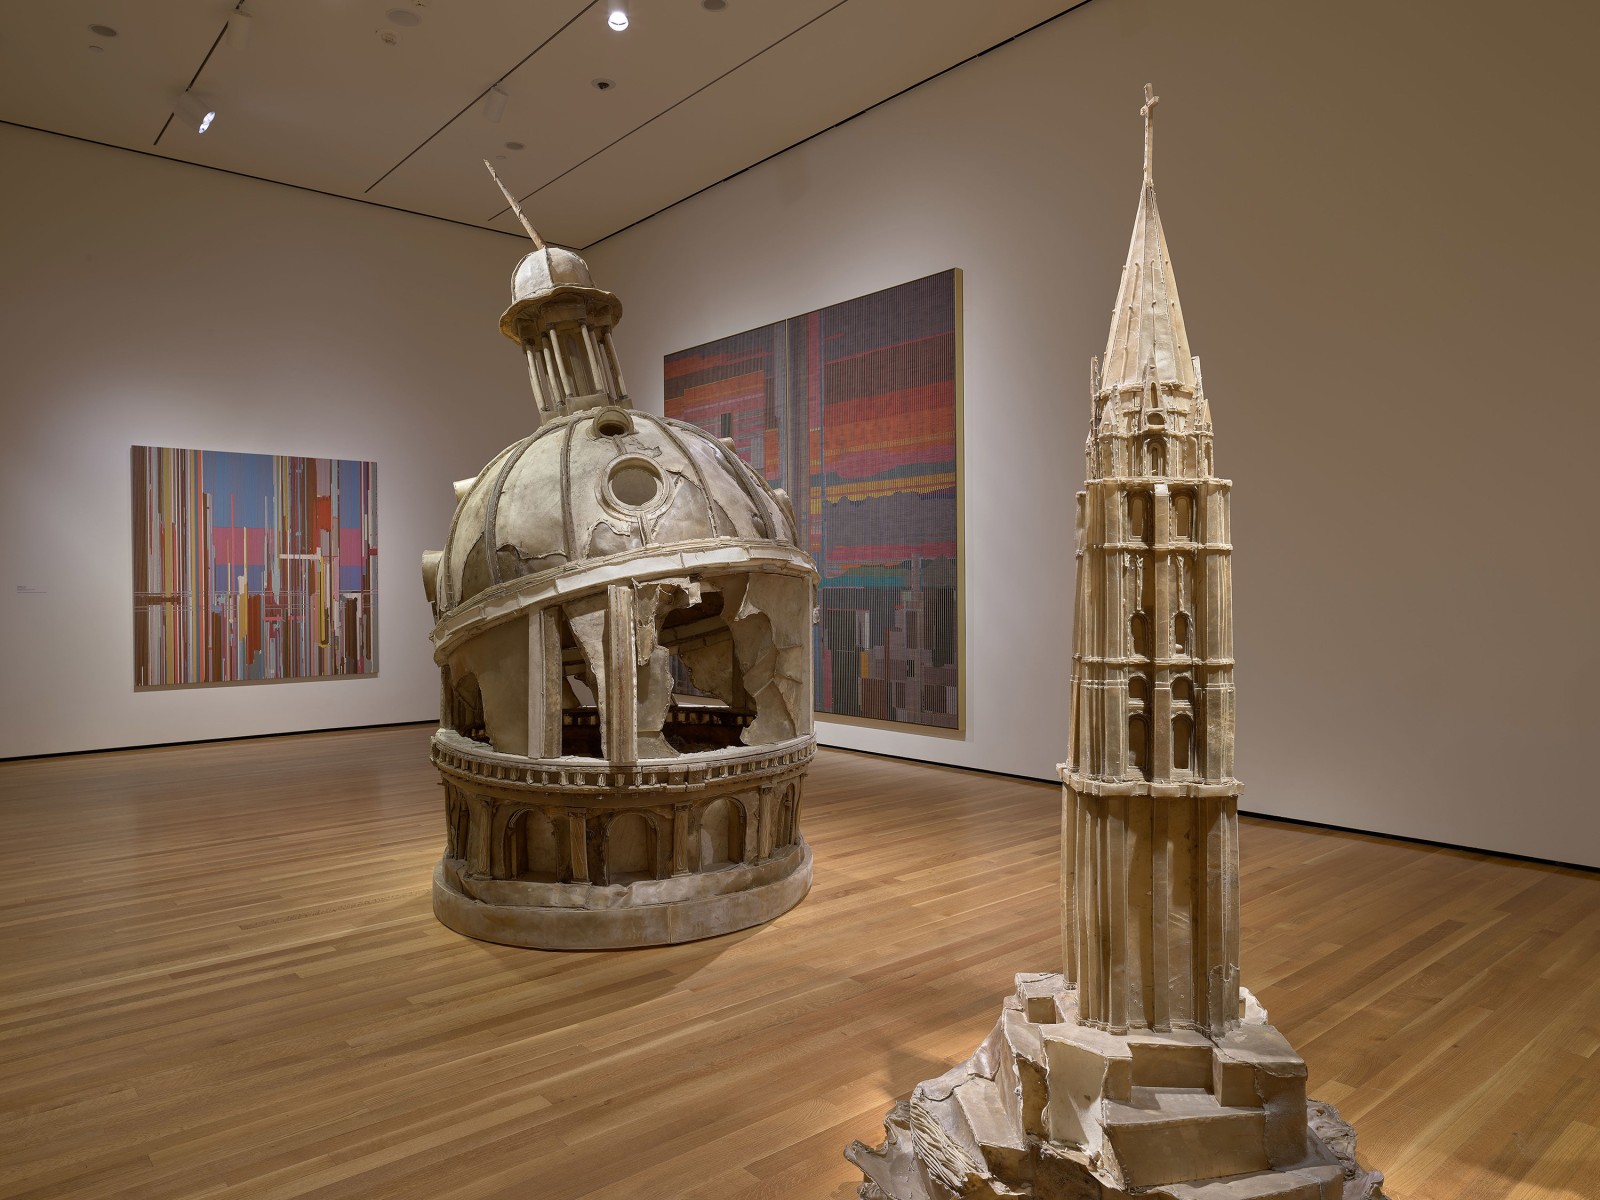 View 1 of Liu Wei's solo museum exhibition titled Invisible Cities at the Cleveland Museum of Art